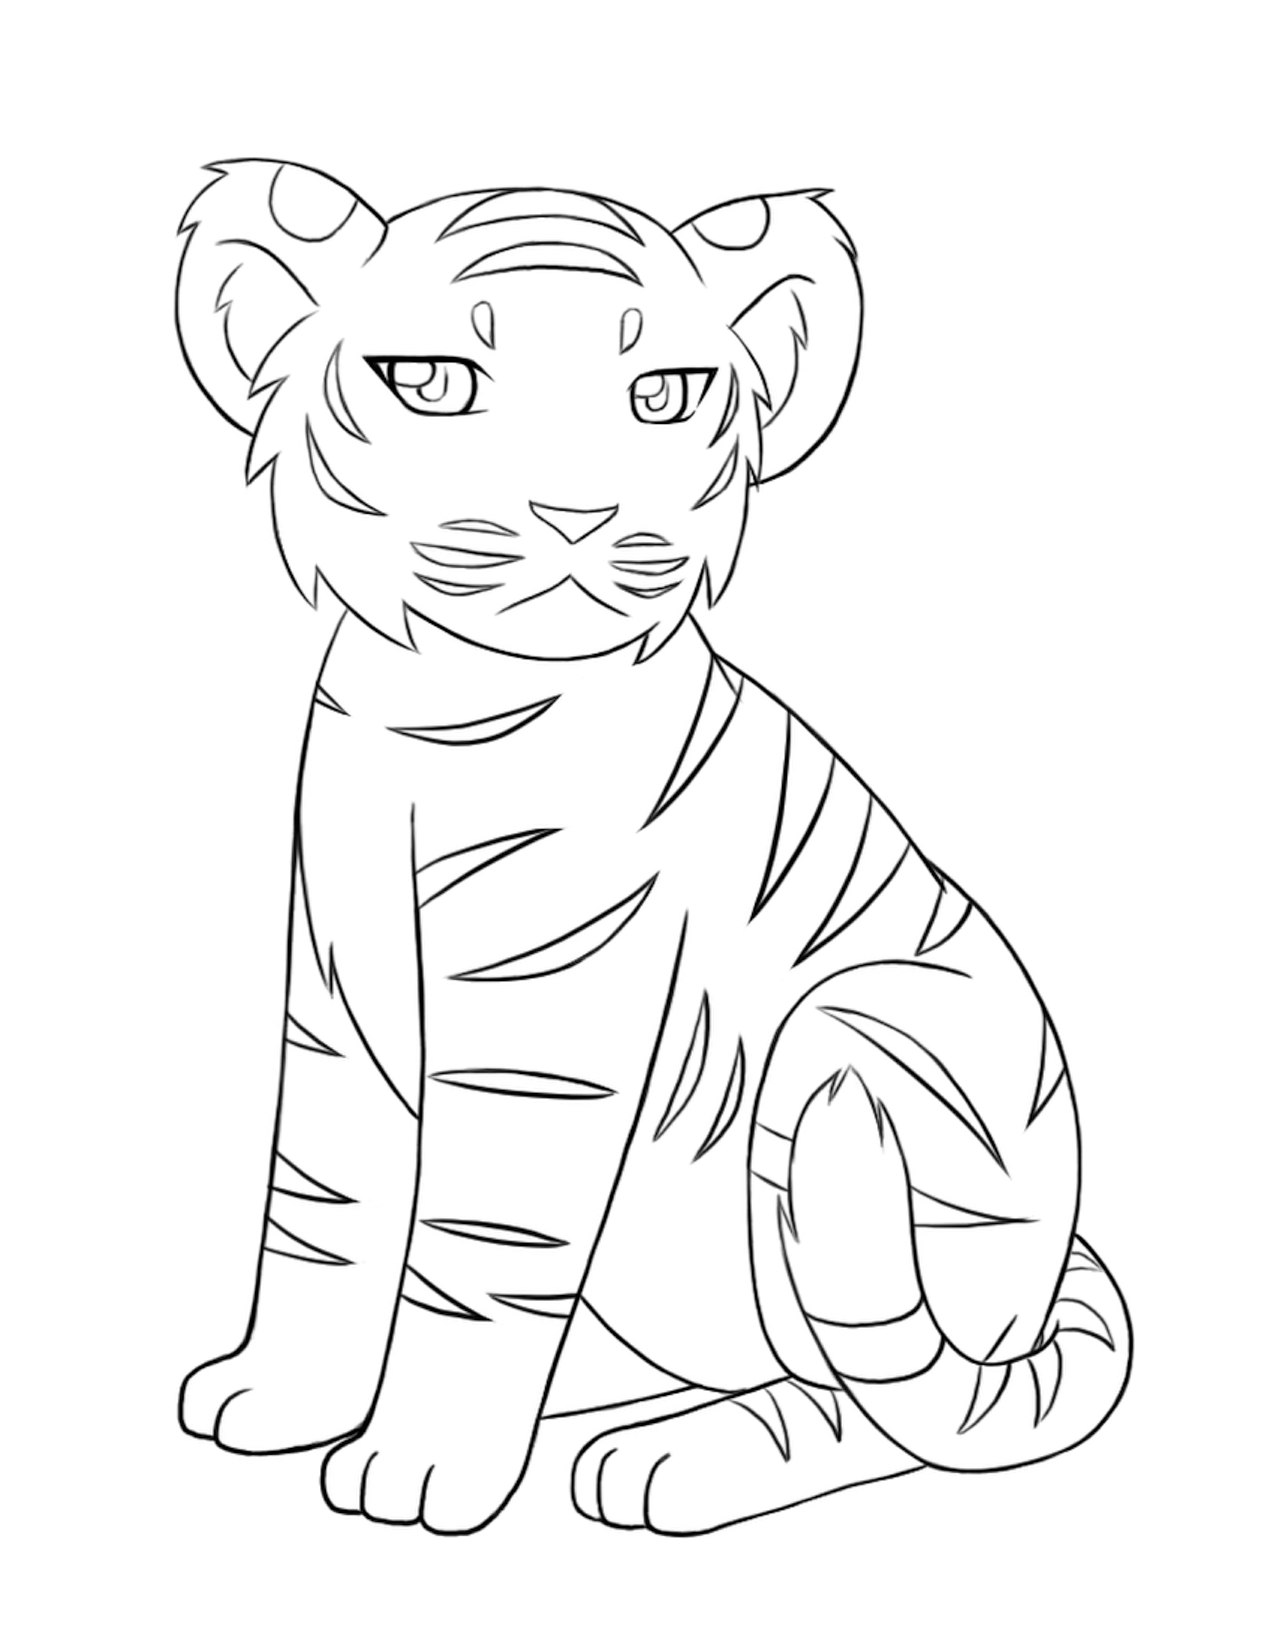 Download Free Printable Tiger Coloring Pages For Kids